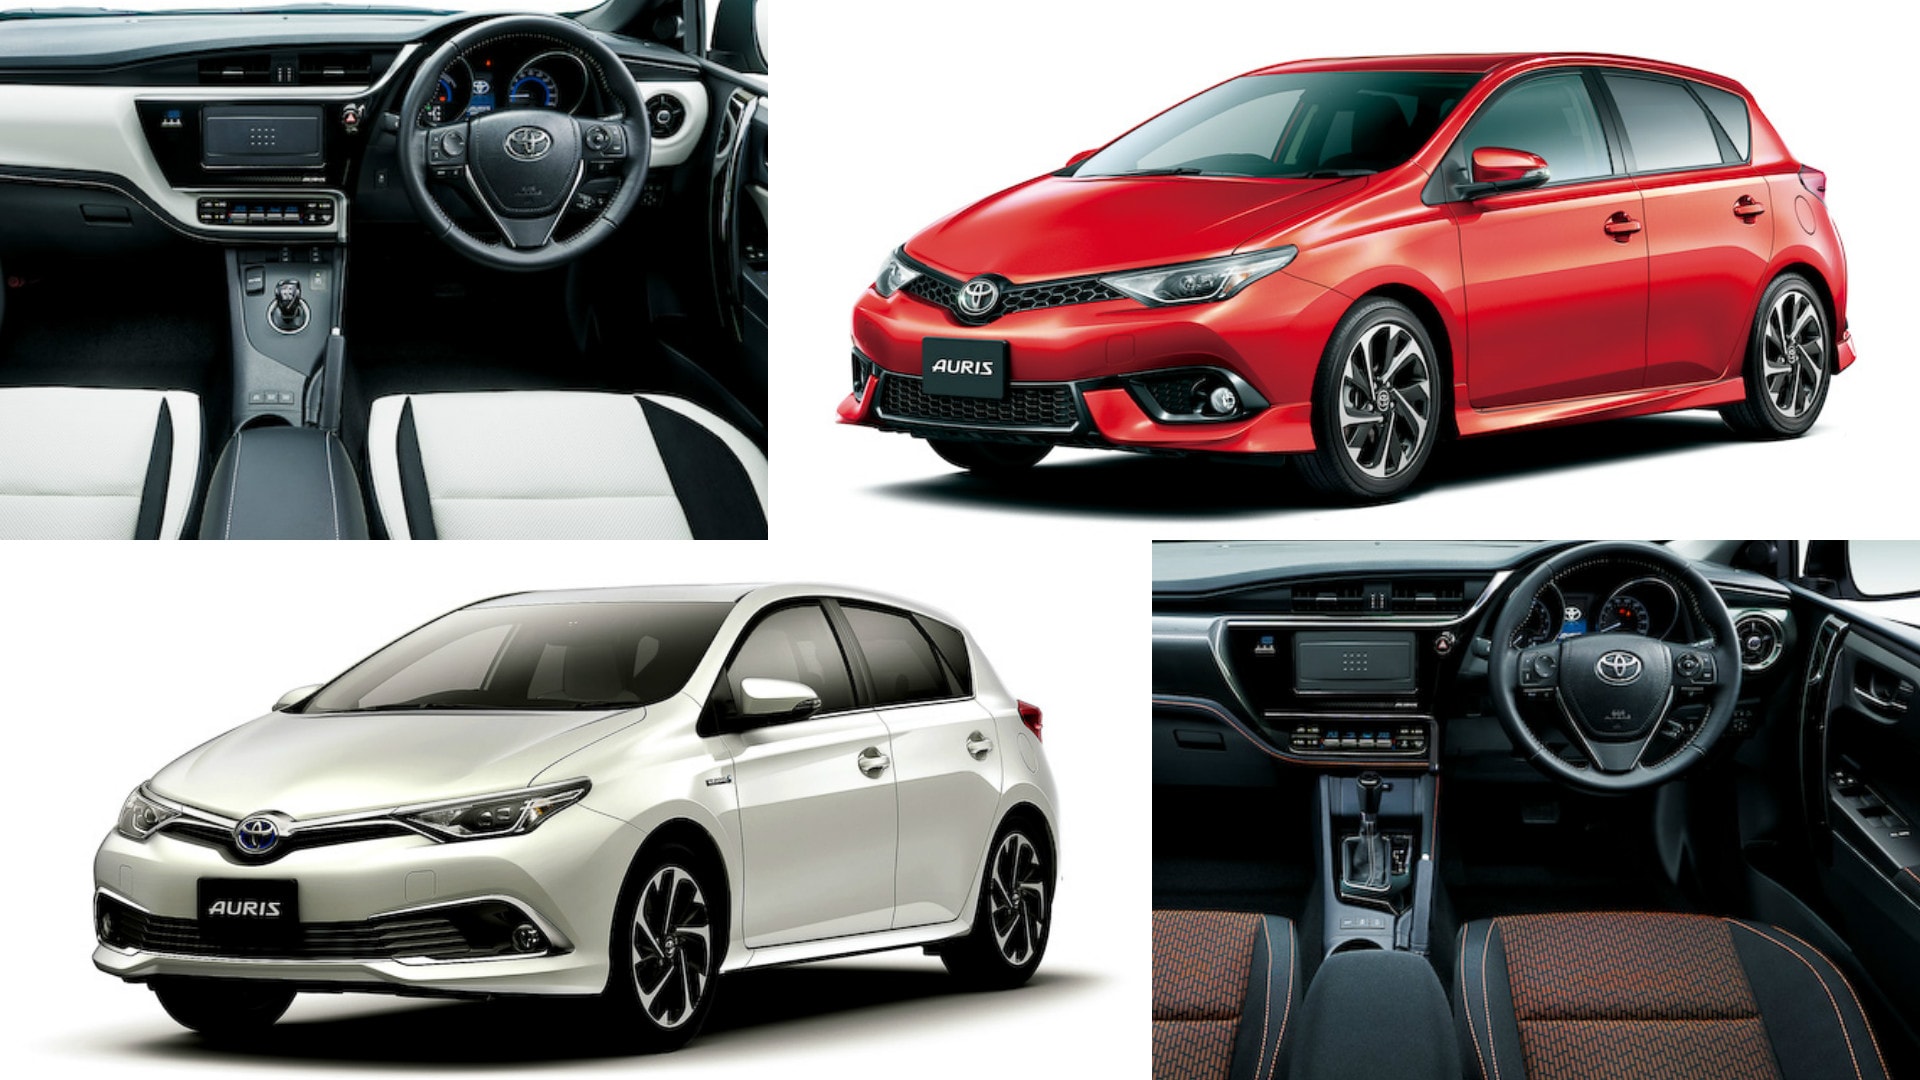 https://s1.cdn.autoevolution.com/images/news/toyota-auris-hybrid-and-120t-rs-package-launched-in-japan-106737_1.jpg